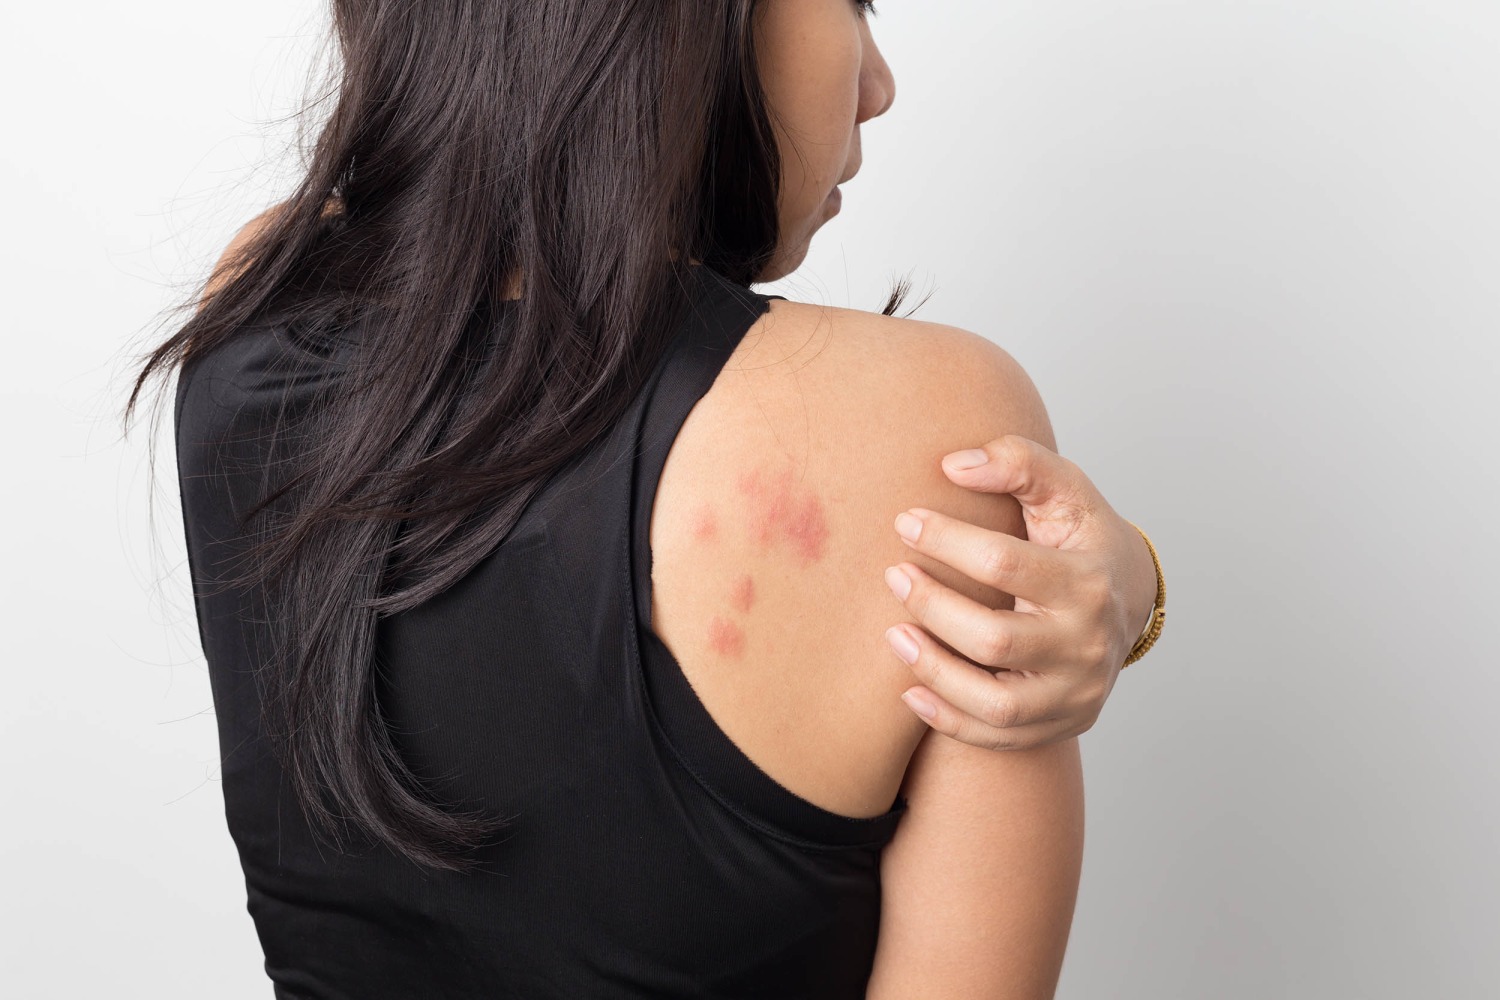 This skin rash is back after almost vanishing during the pandemic